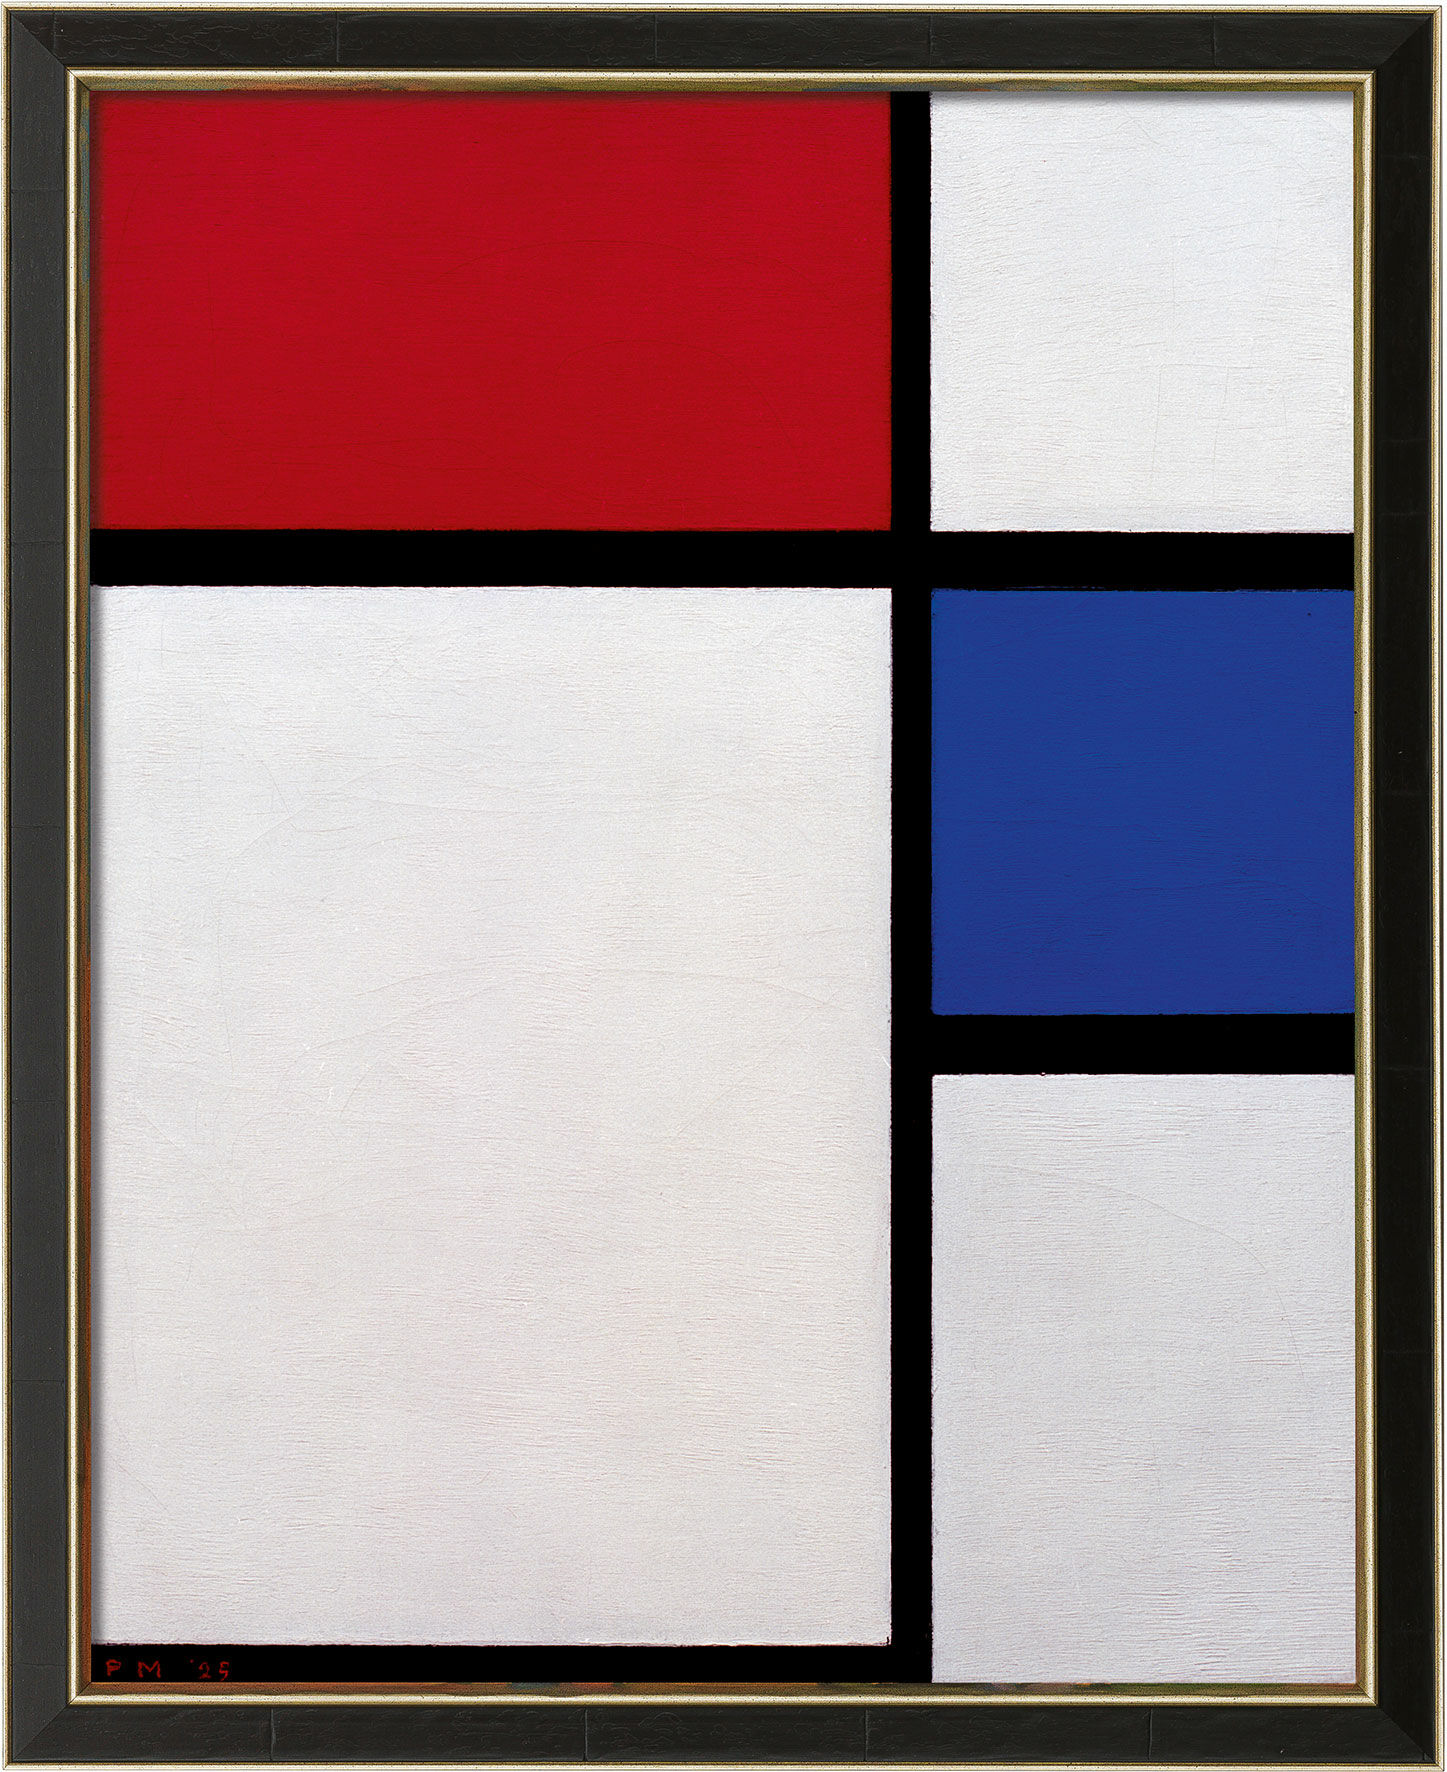 Picture "Composition No. II, with Red and Blue" (1929), framed by Piet Mondrian